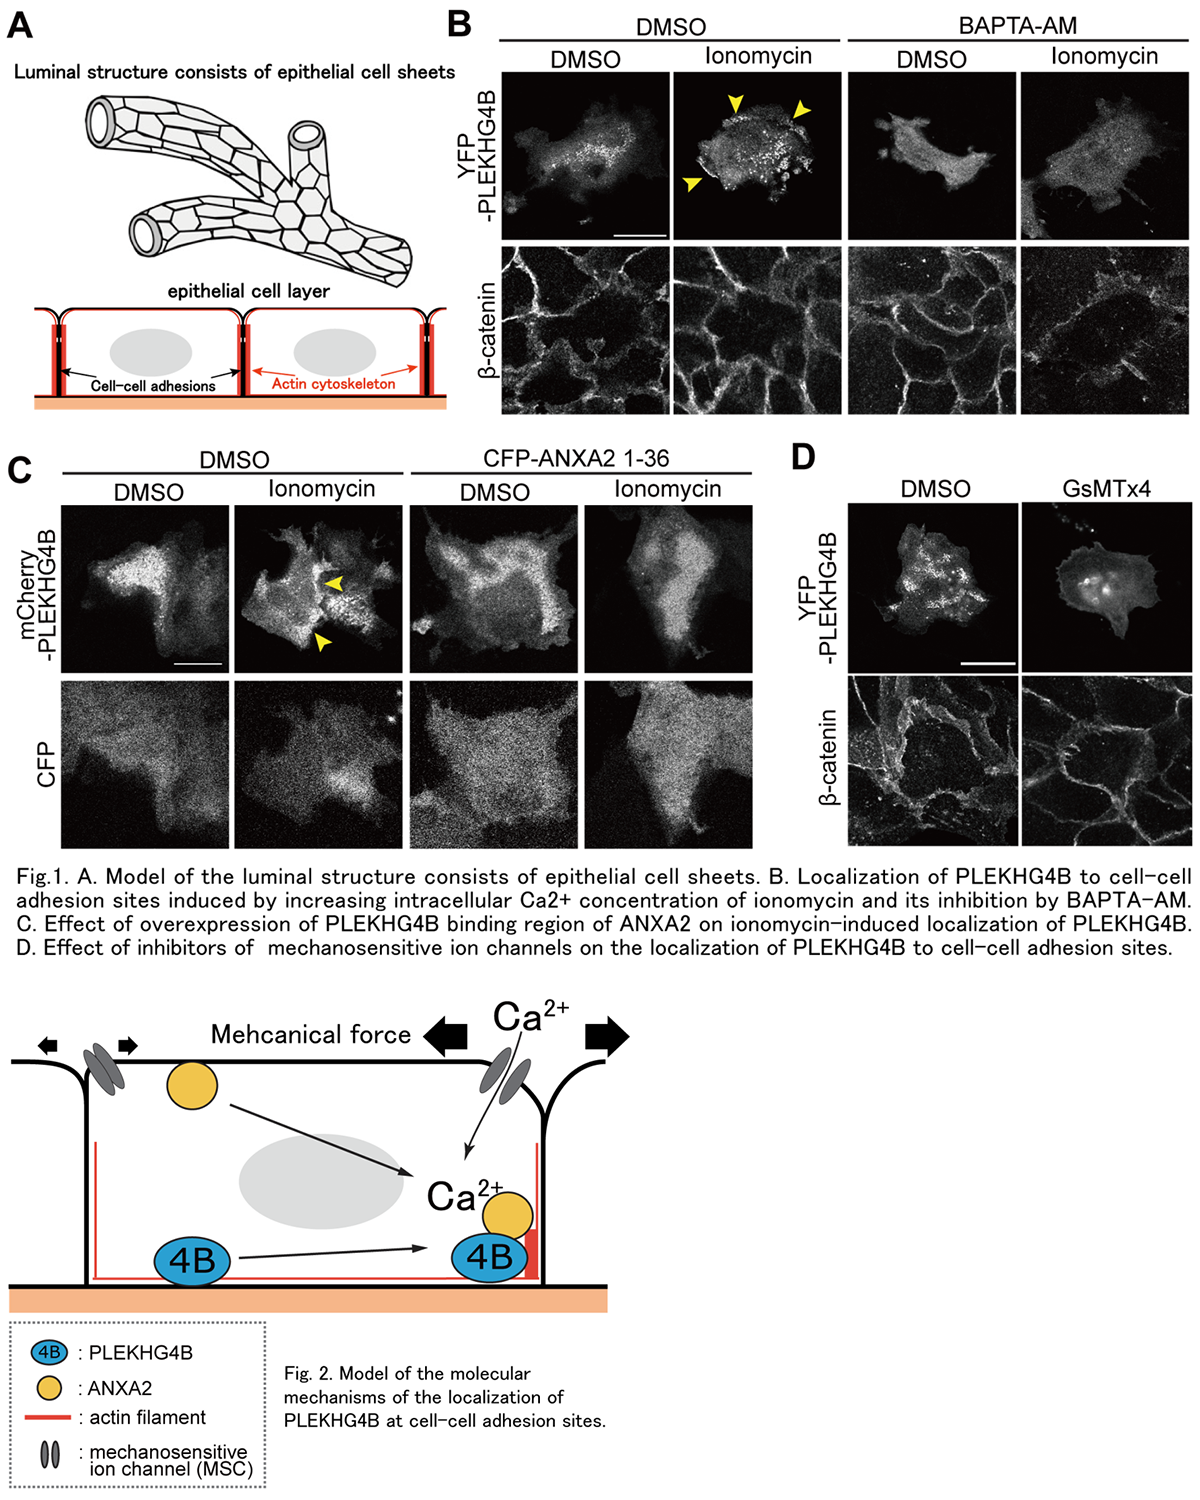 Calcium influx promotes PLEKHG4B localization to cell-cell junctions and regulates the integrity of junctional actin filaments